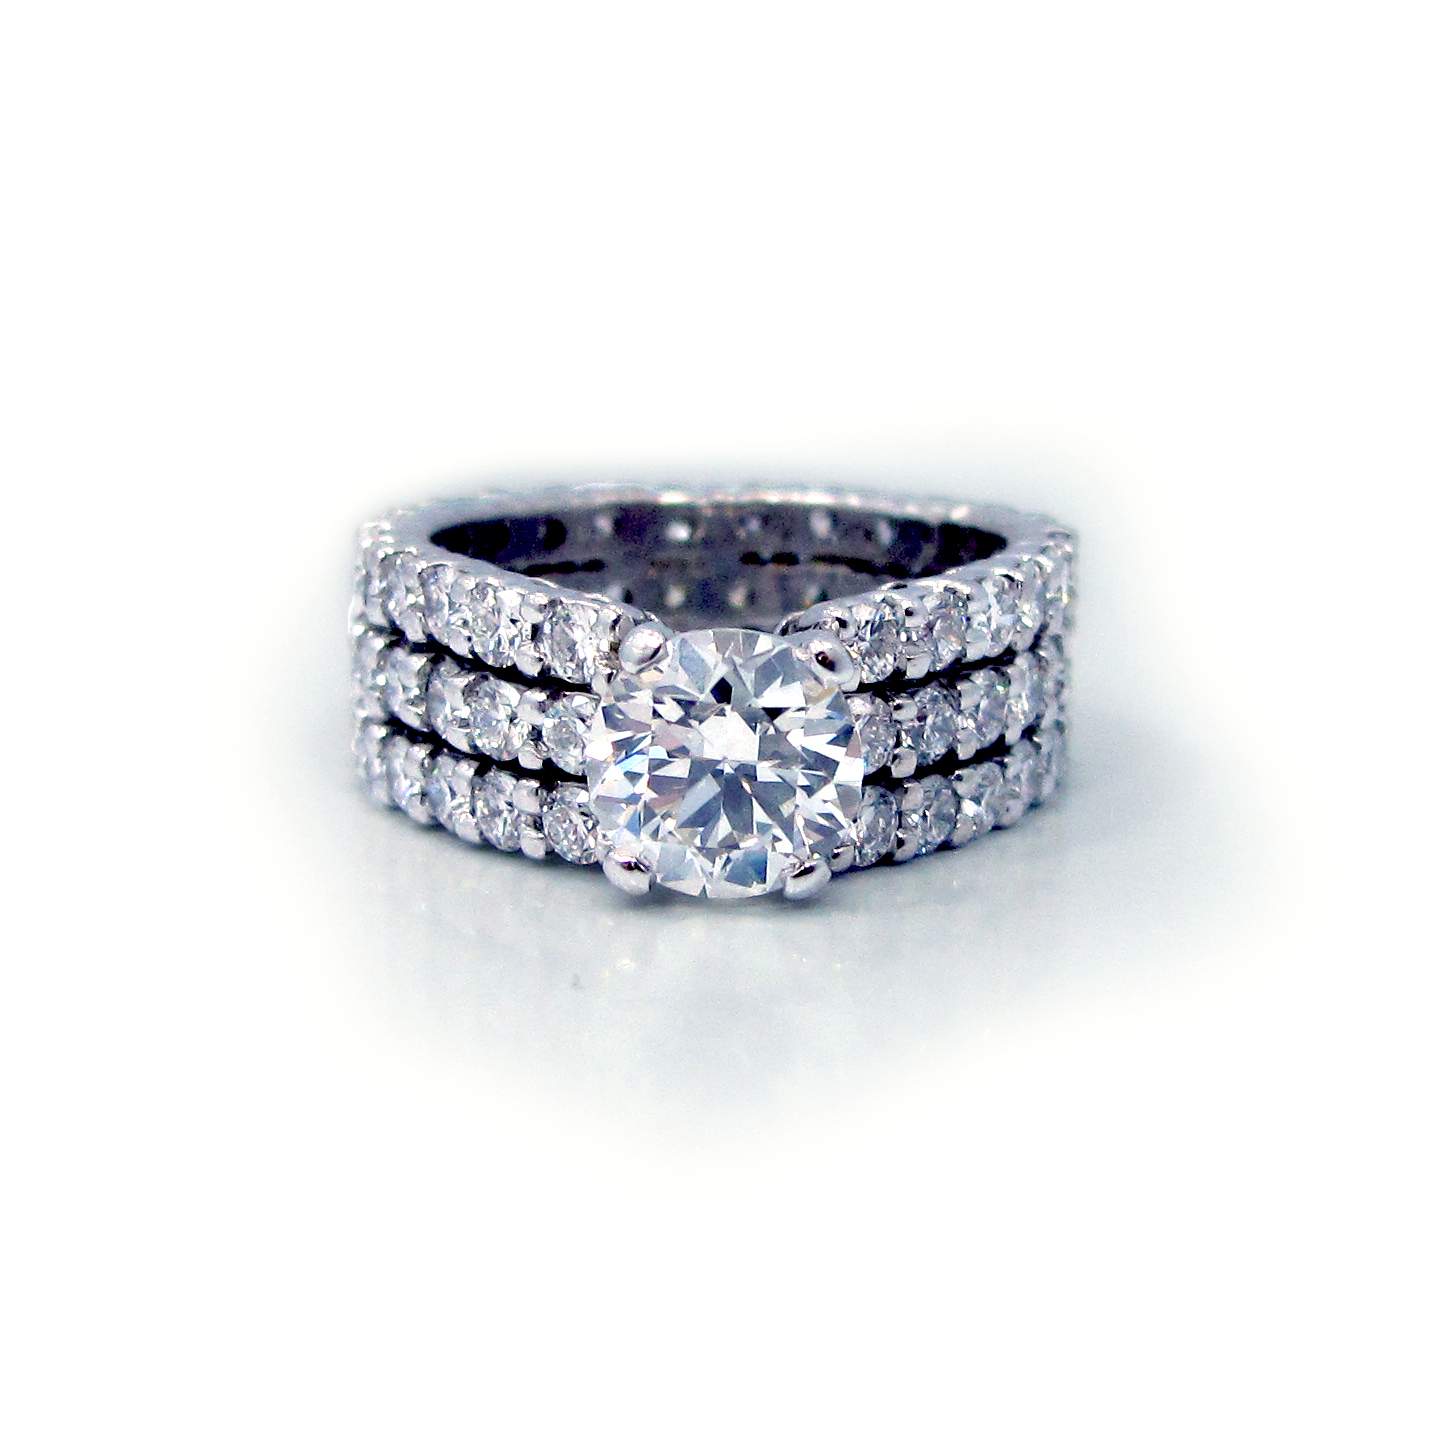 This is a picture of a Three Row Shared Prong Engagement Setting